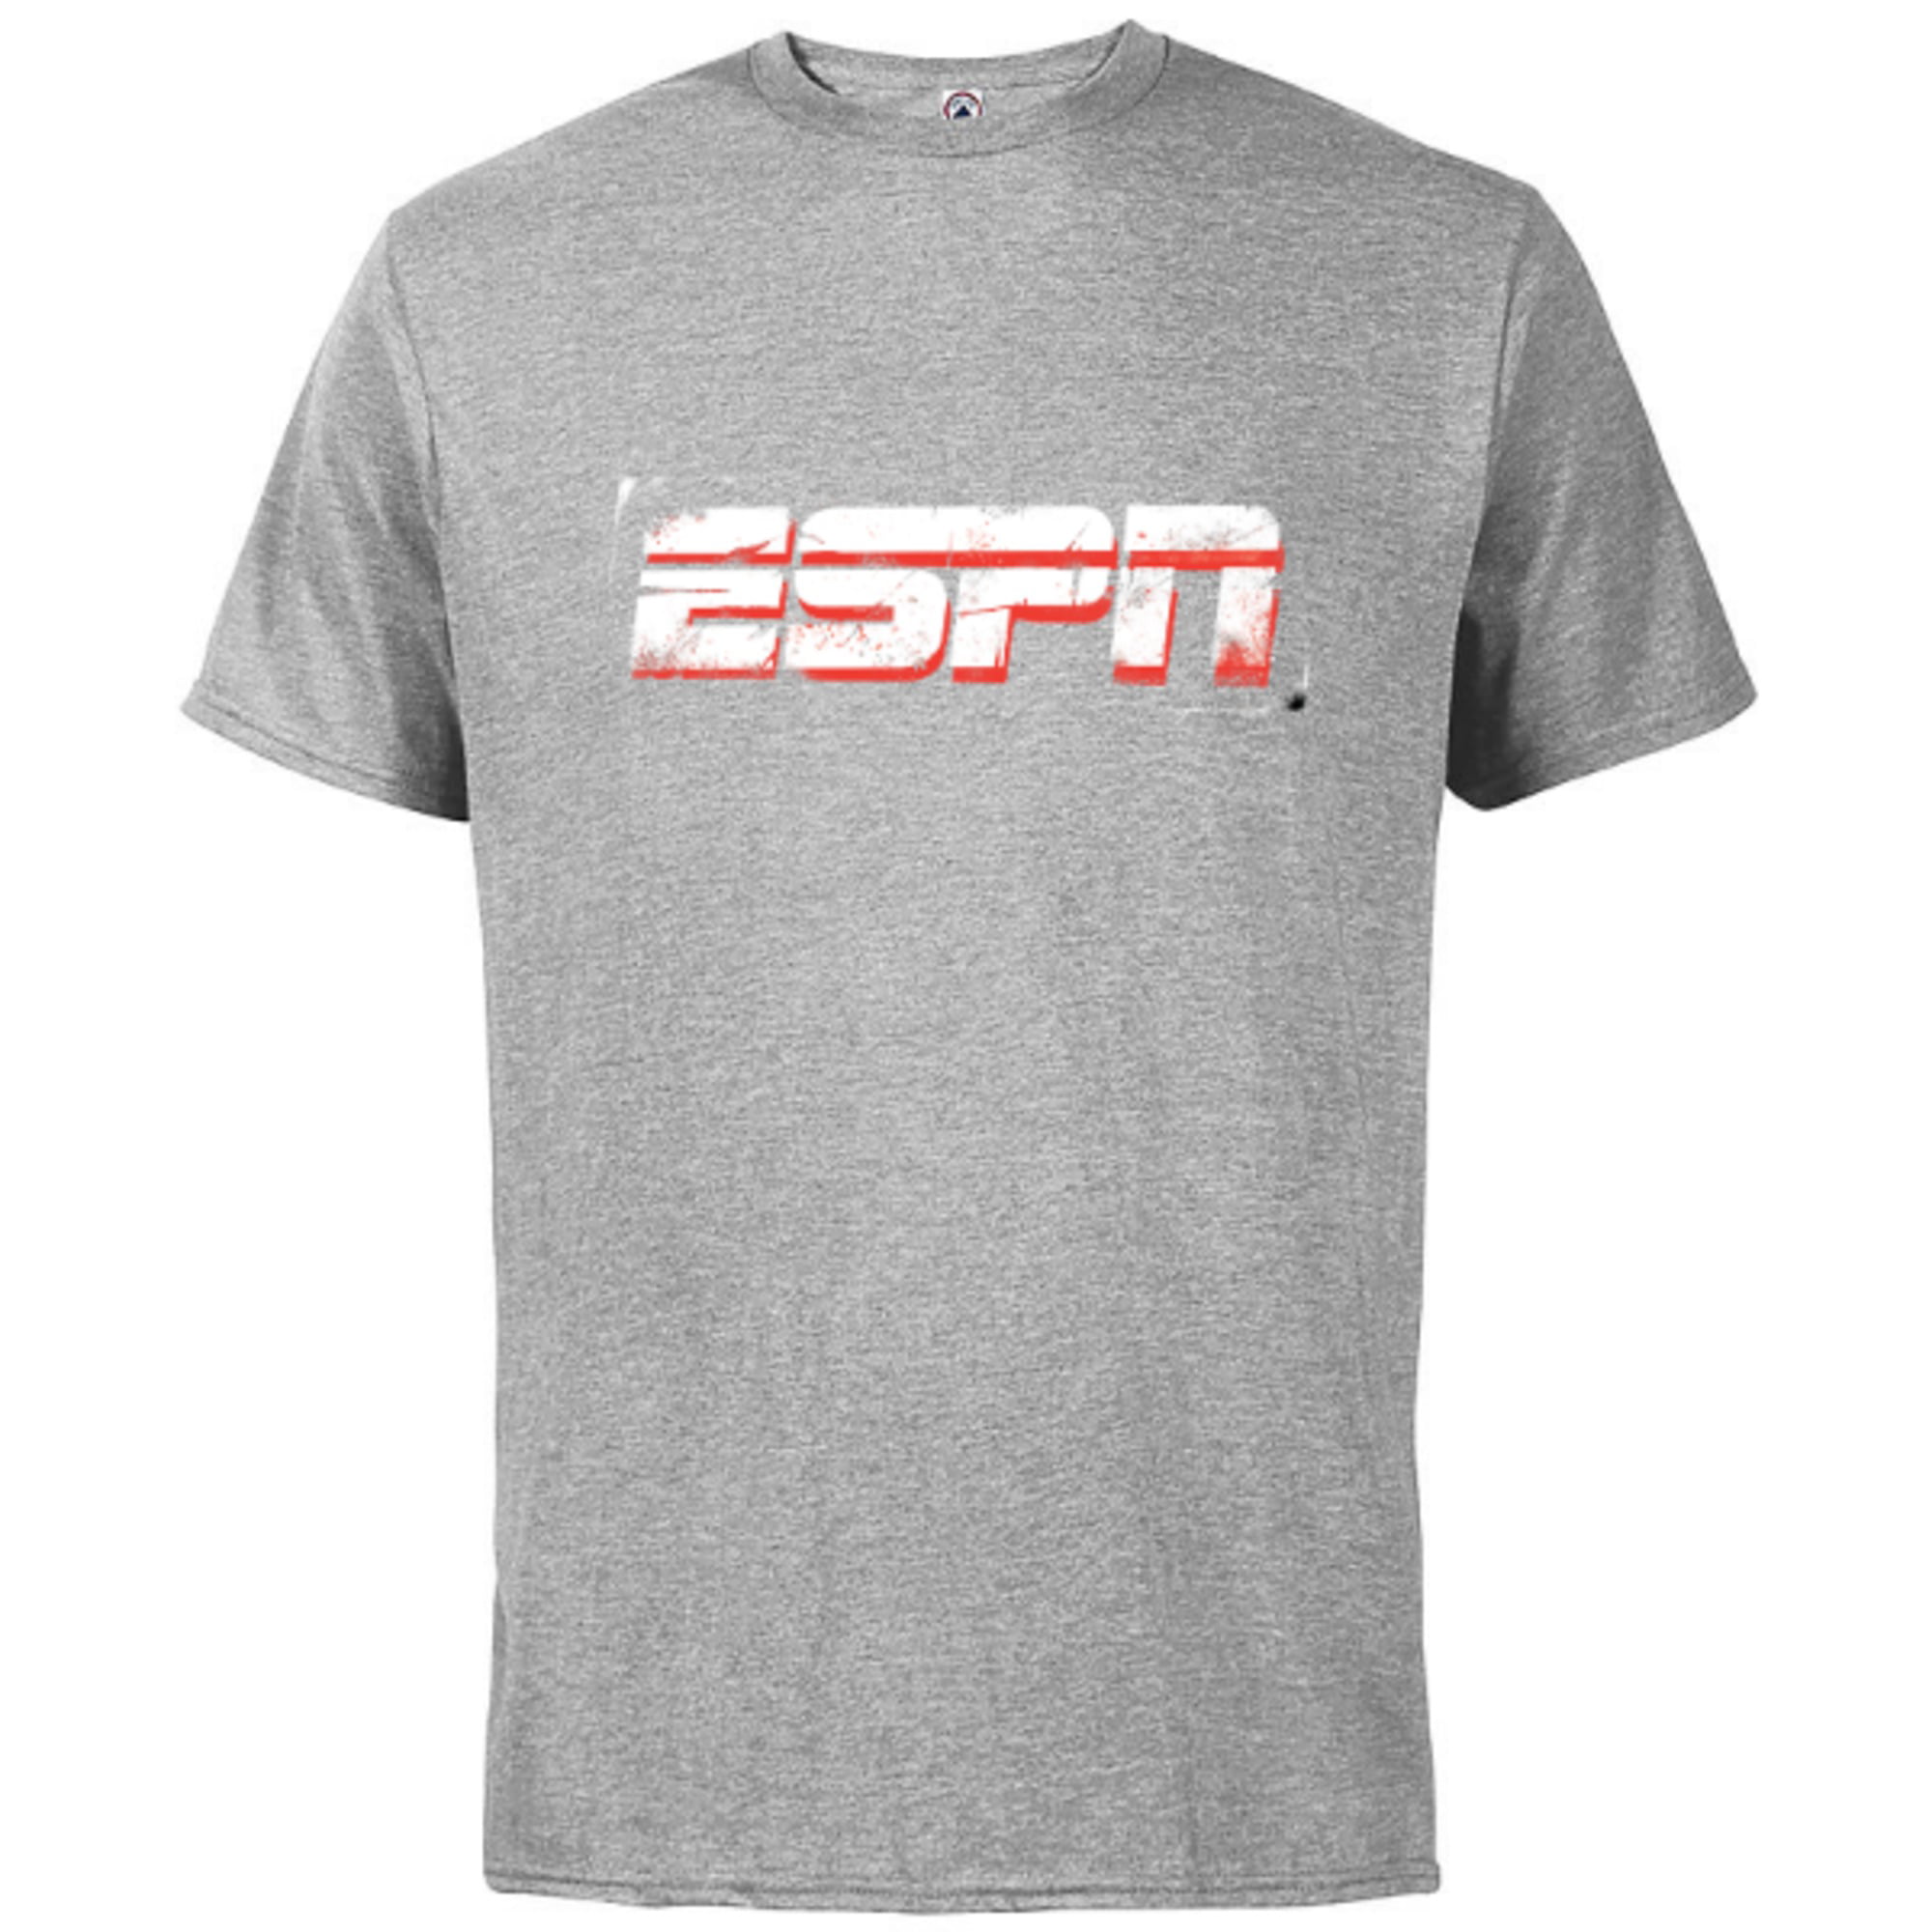 ESPN Logo Distressed Red and White Standard - Short Sleeve Cotton T-Shirt for Adults - Customized-Athletic Heather